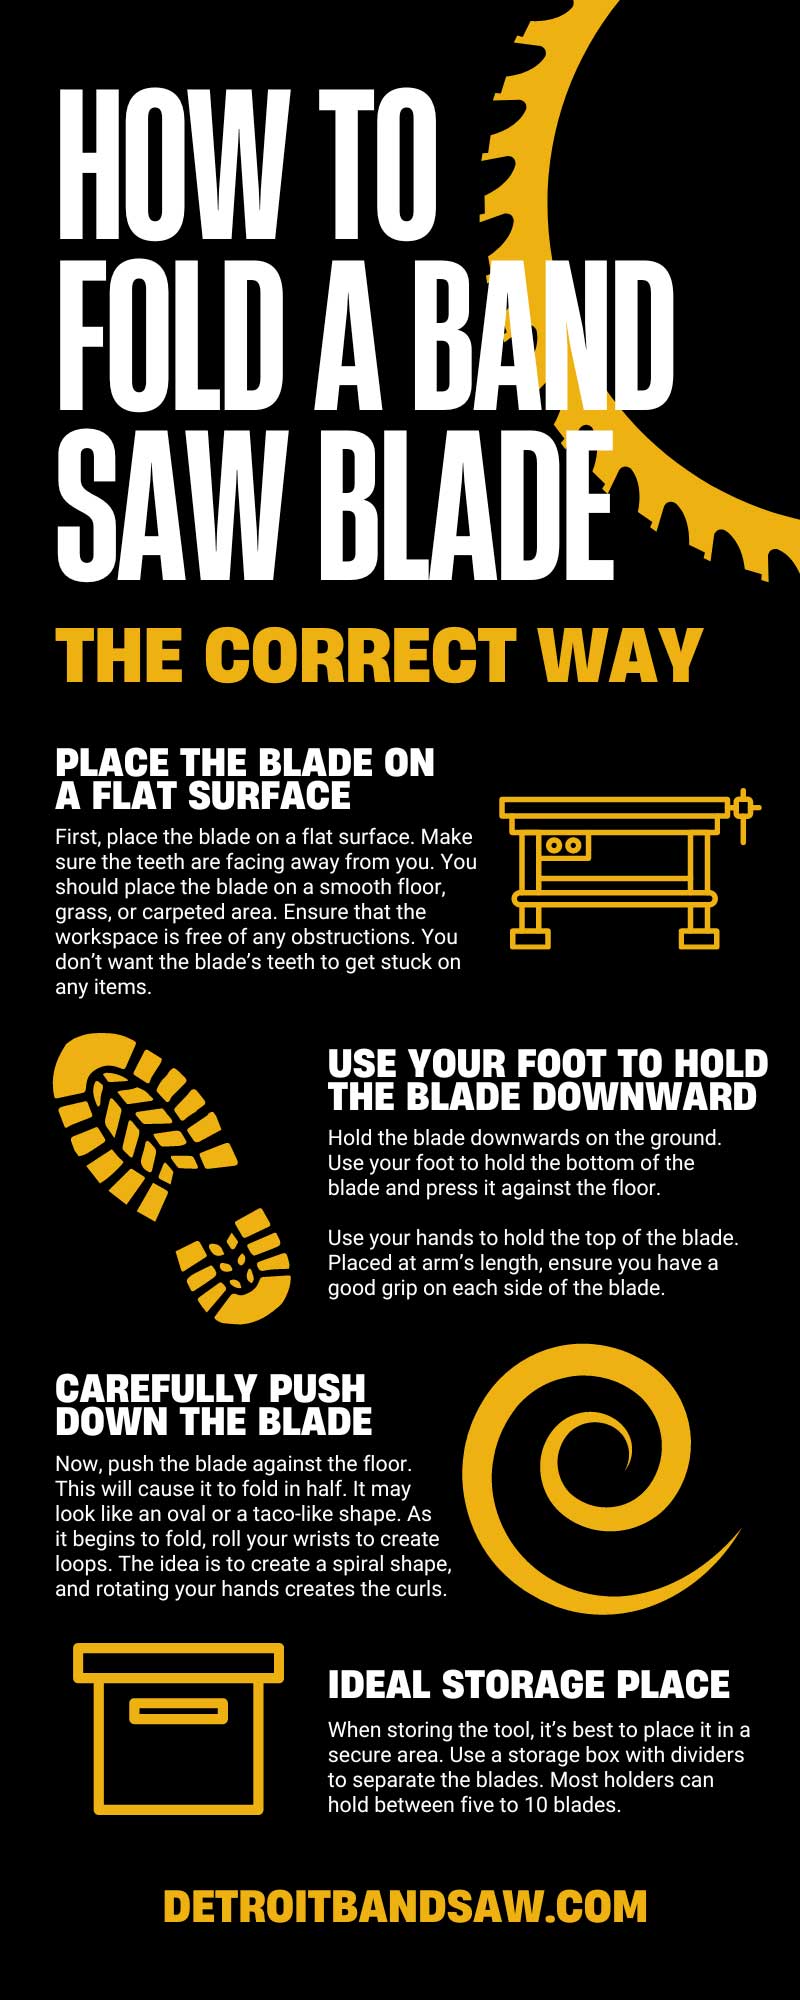 How To Fold a Band Saw Blade the Correct Way